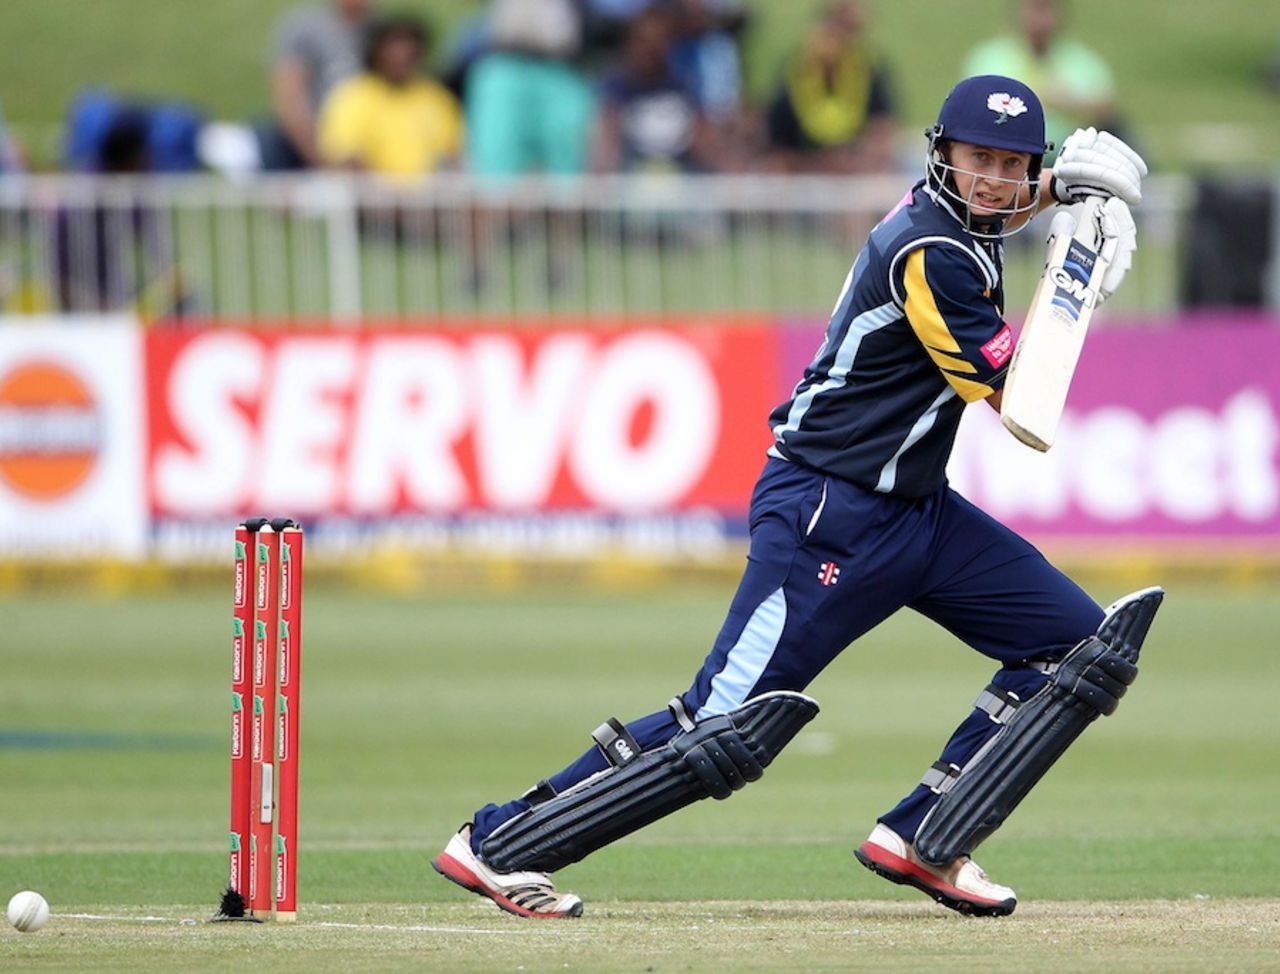 Joe Root plays the ball behind point, Chennai Super Kings v Yorkshire, Champions League T20, Durban, October 22, 2012